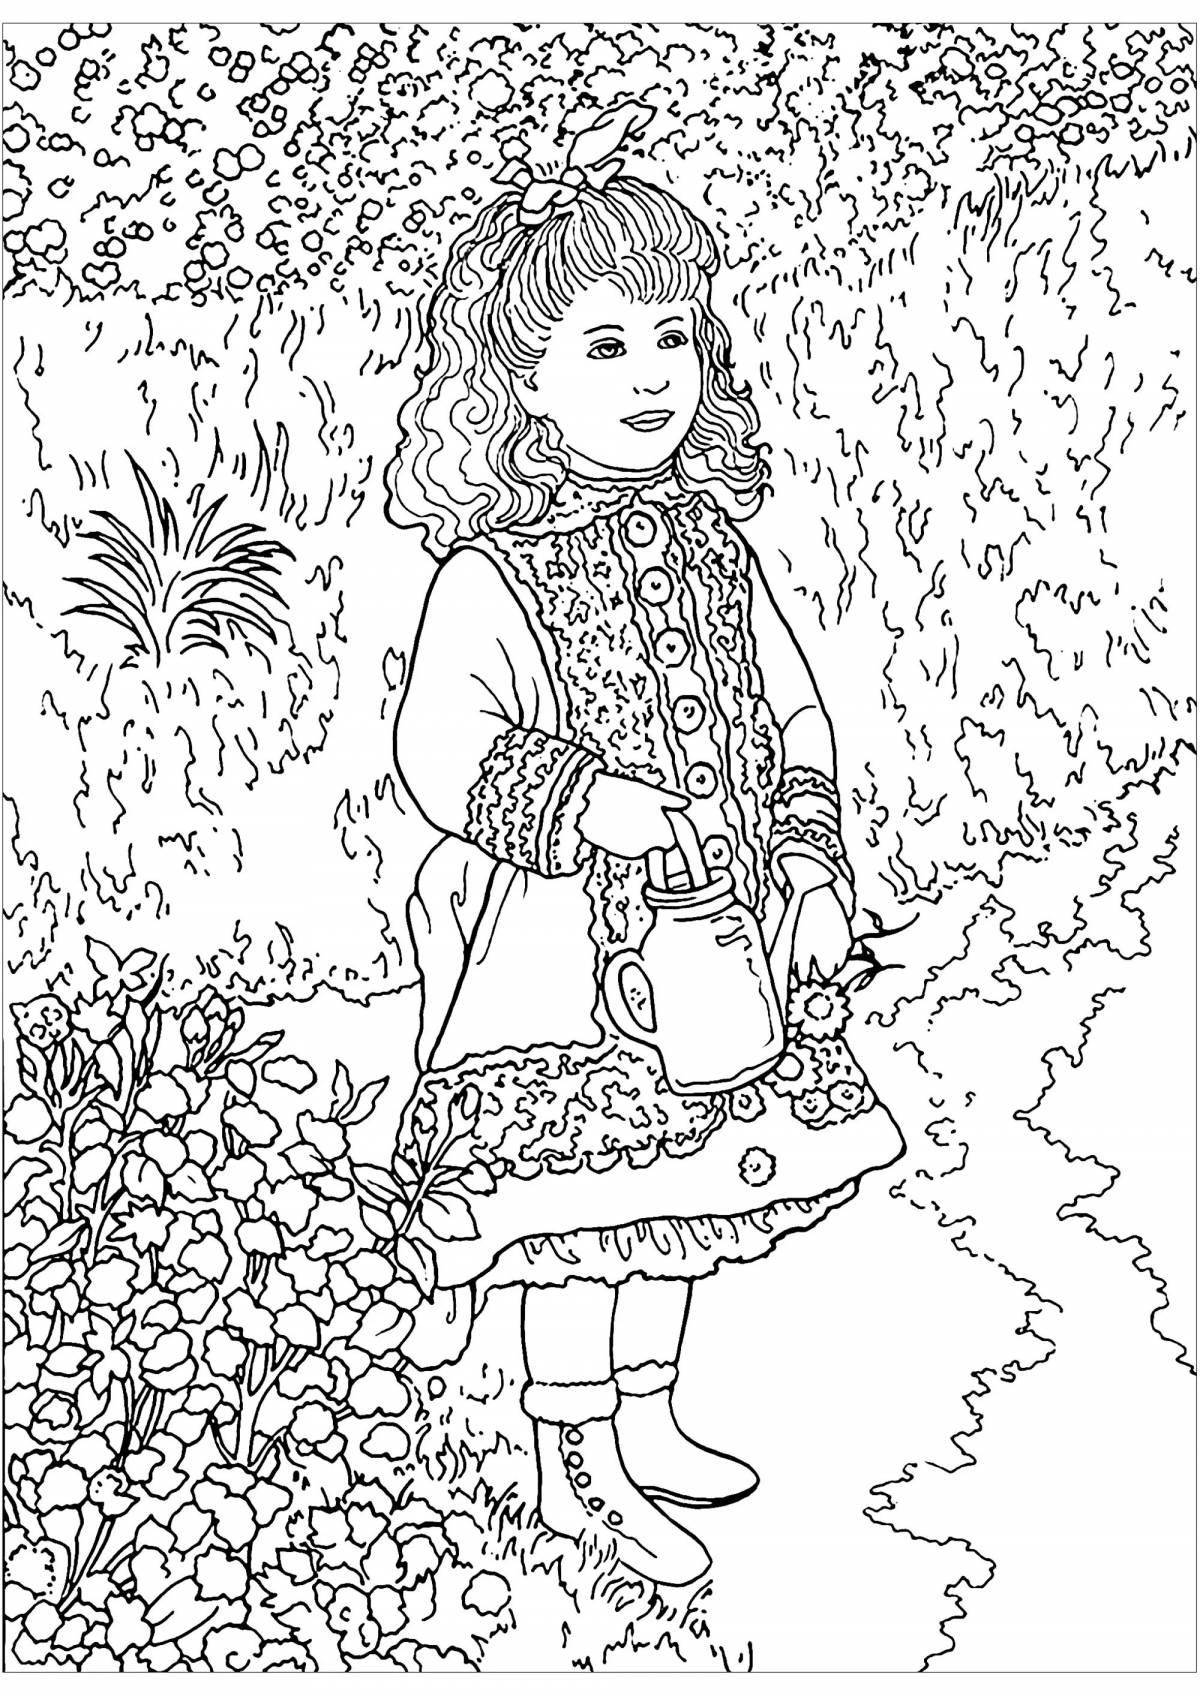 Joyful coloring pages for kids